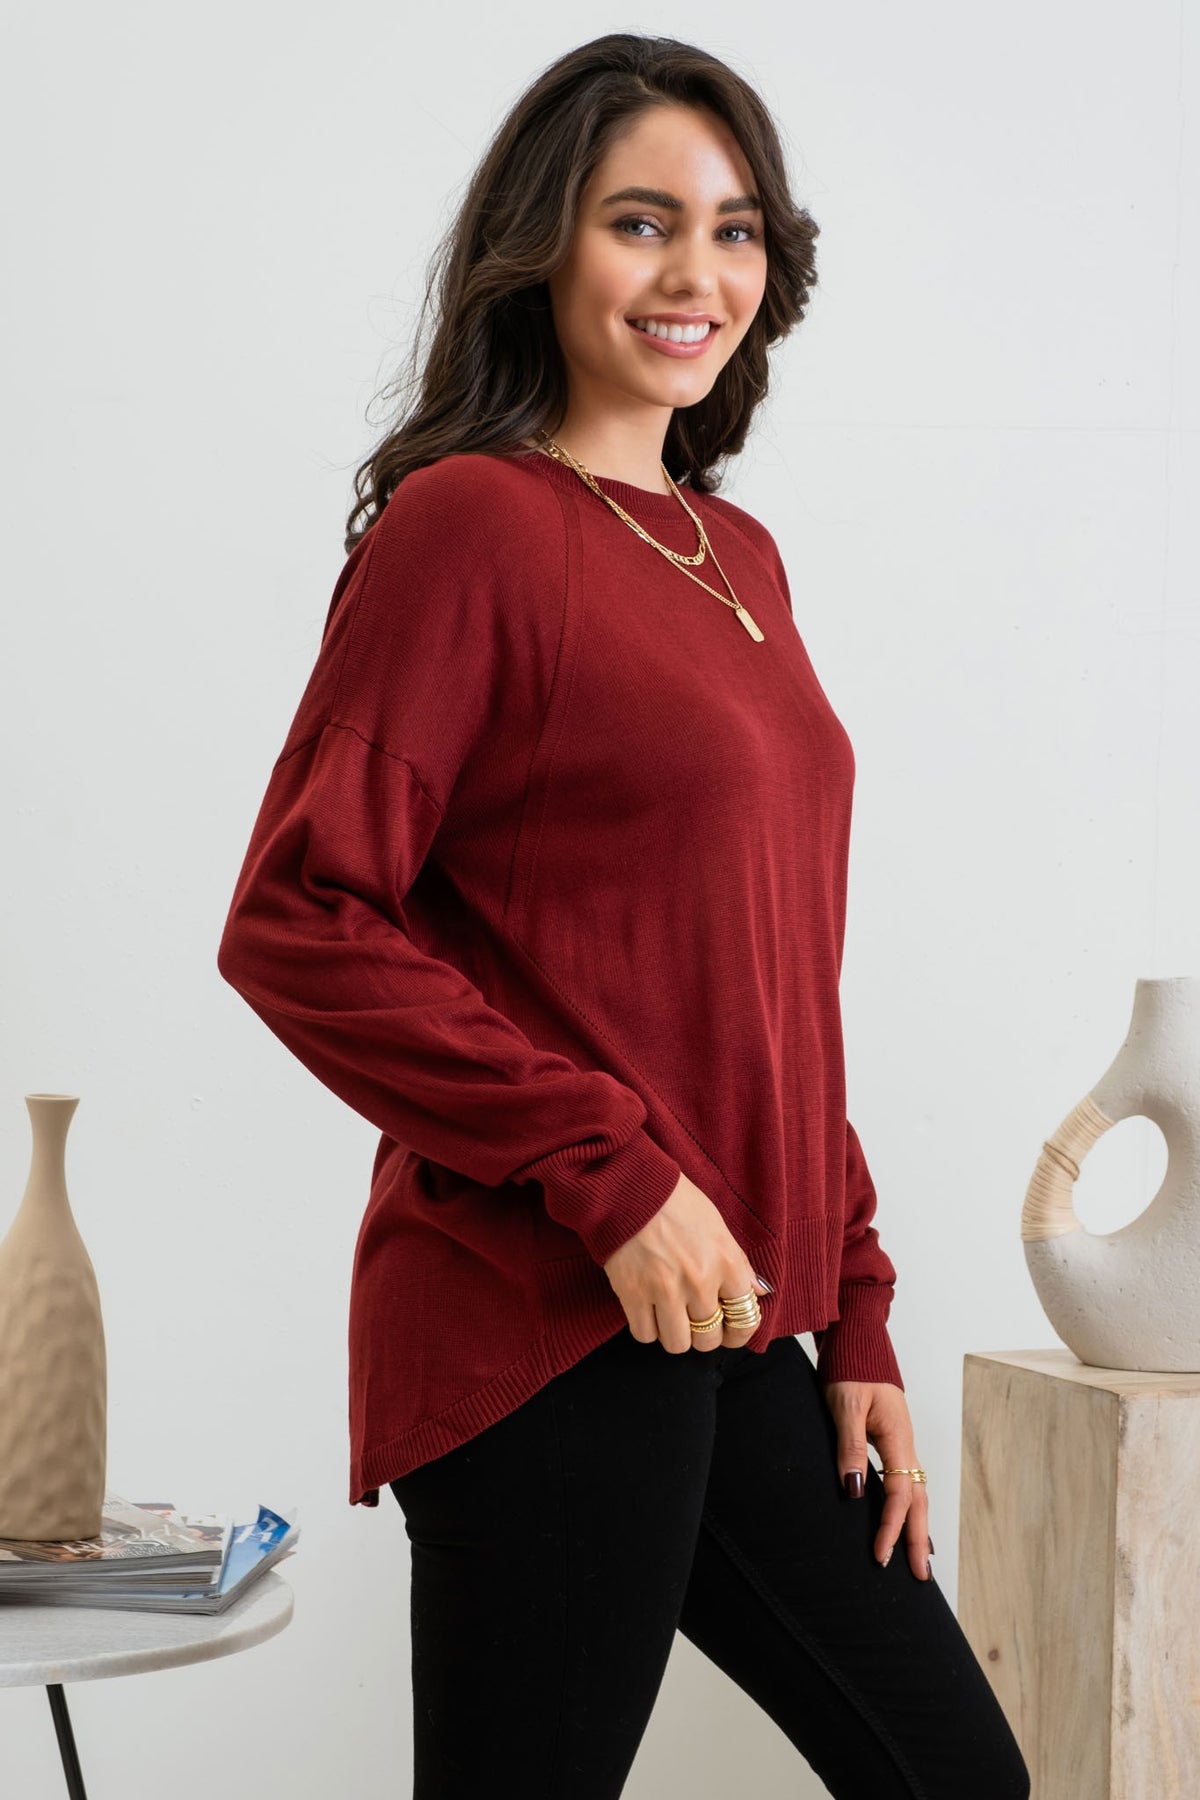 BURGUNDY SOLID BACK BUTTONED PULLOVER SWEATER